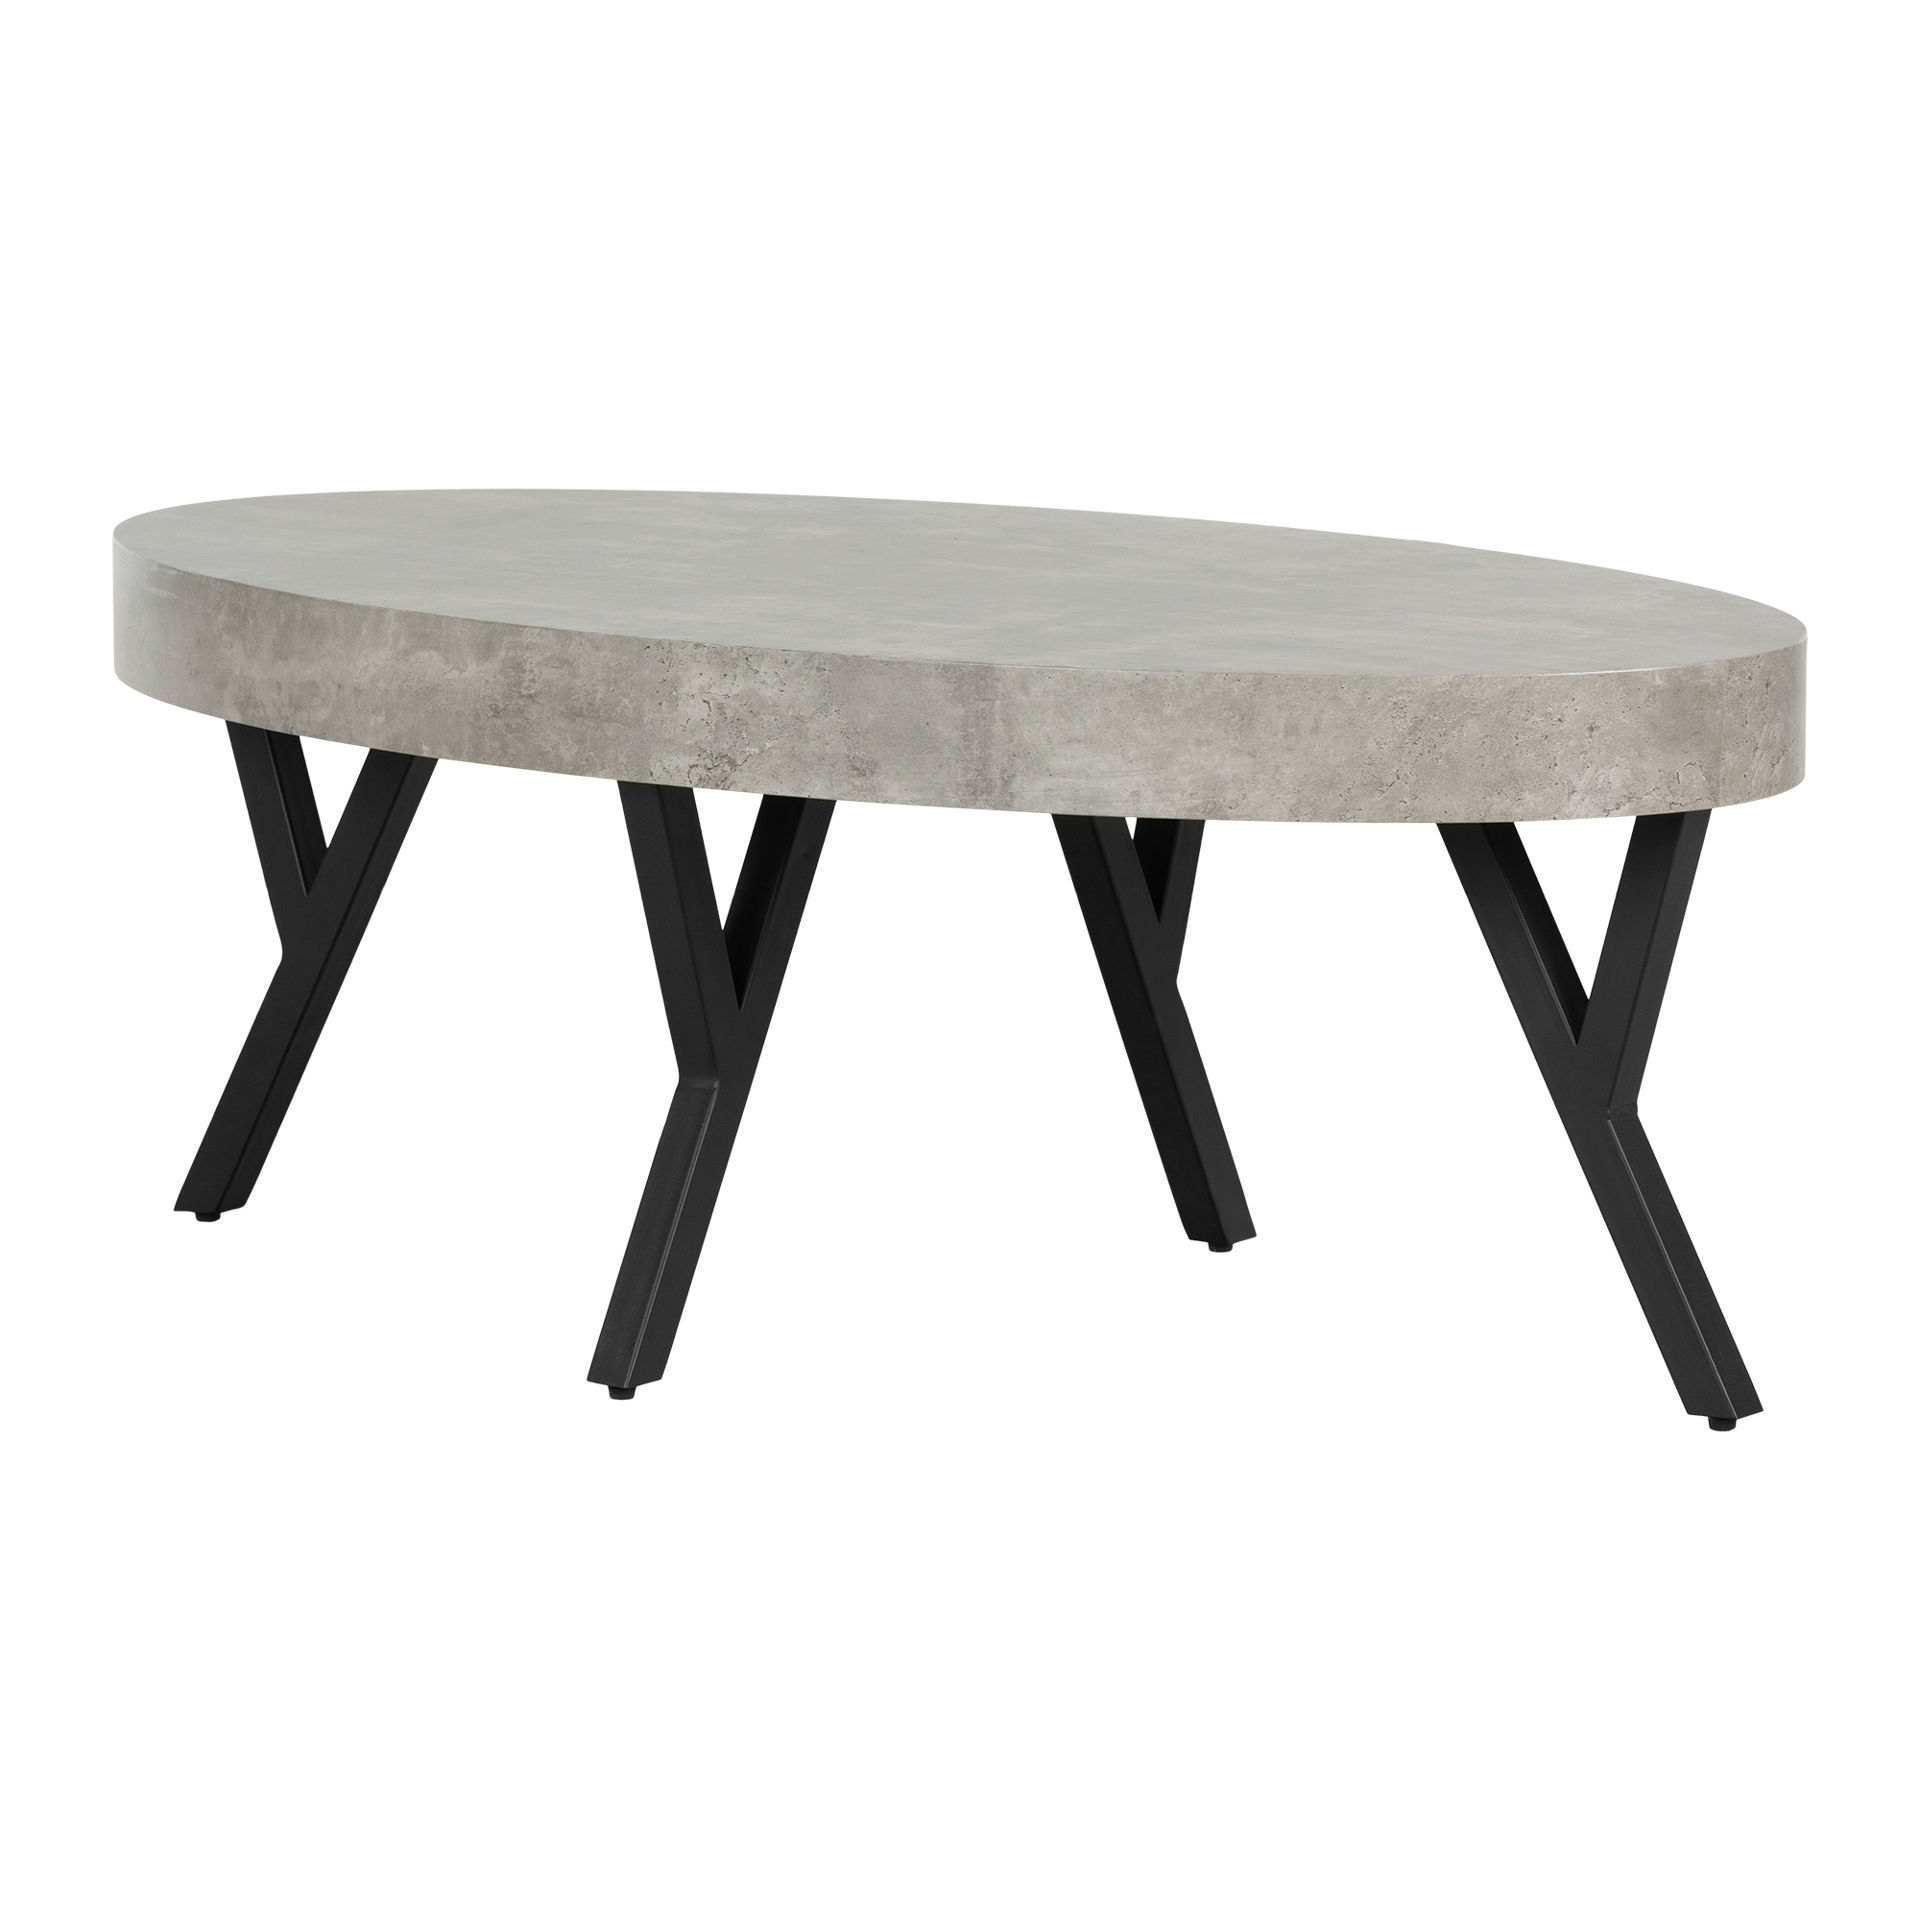 luister Higgins Zeker 12668 City Life Coffee Table by South Shore | AFW.com